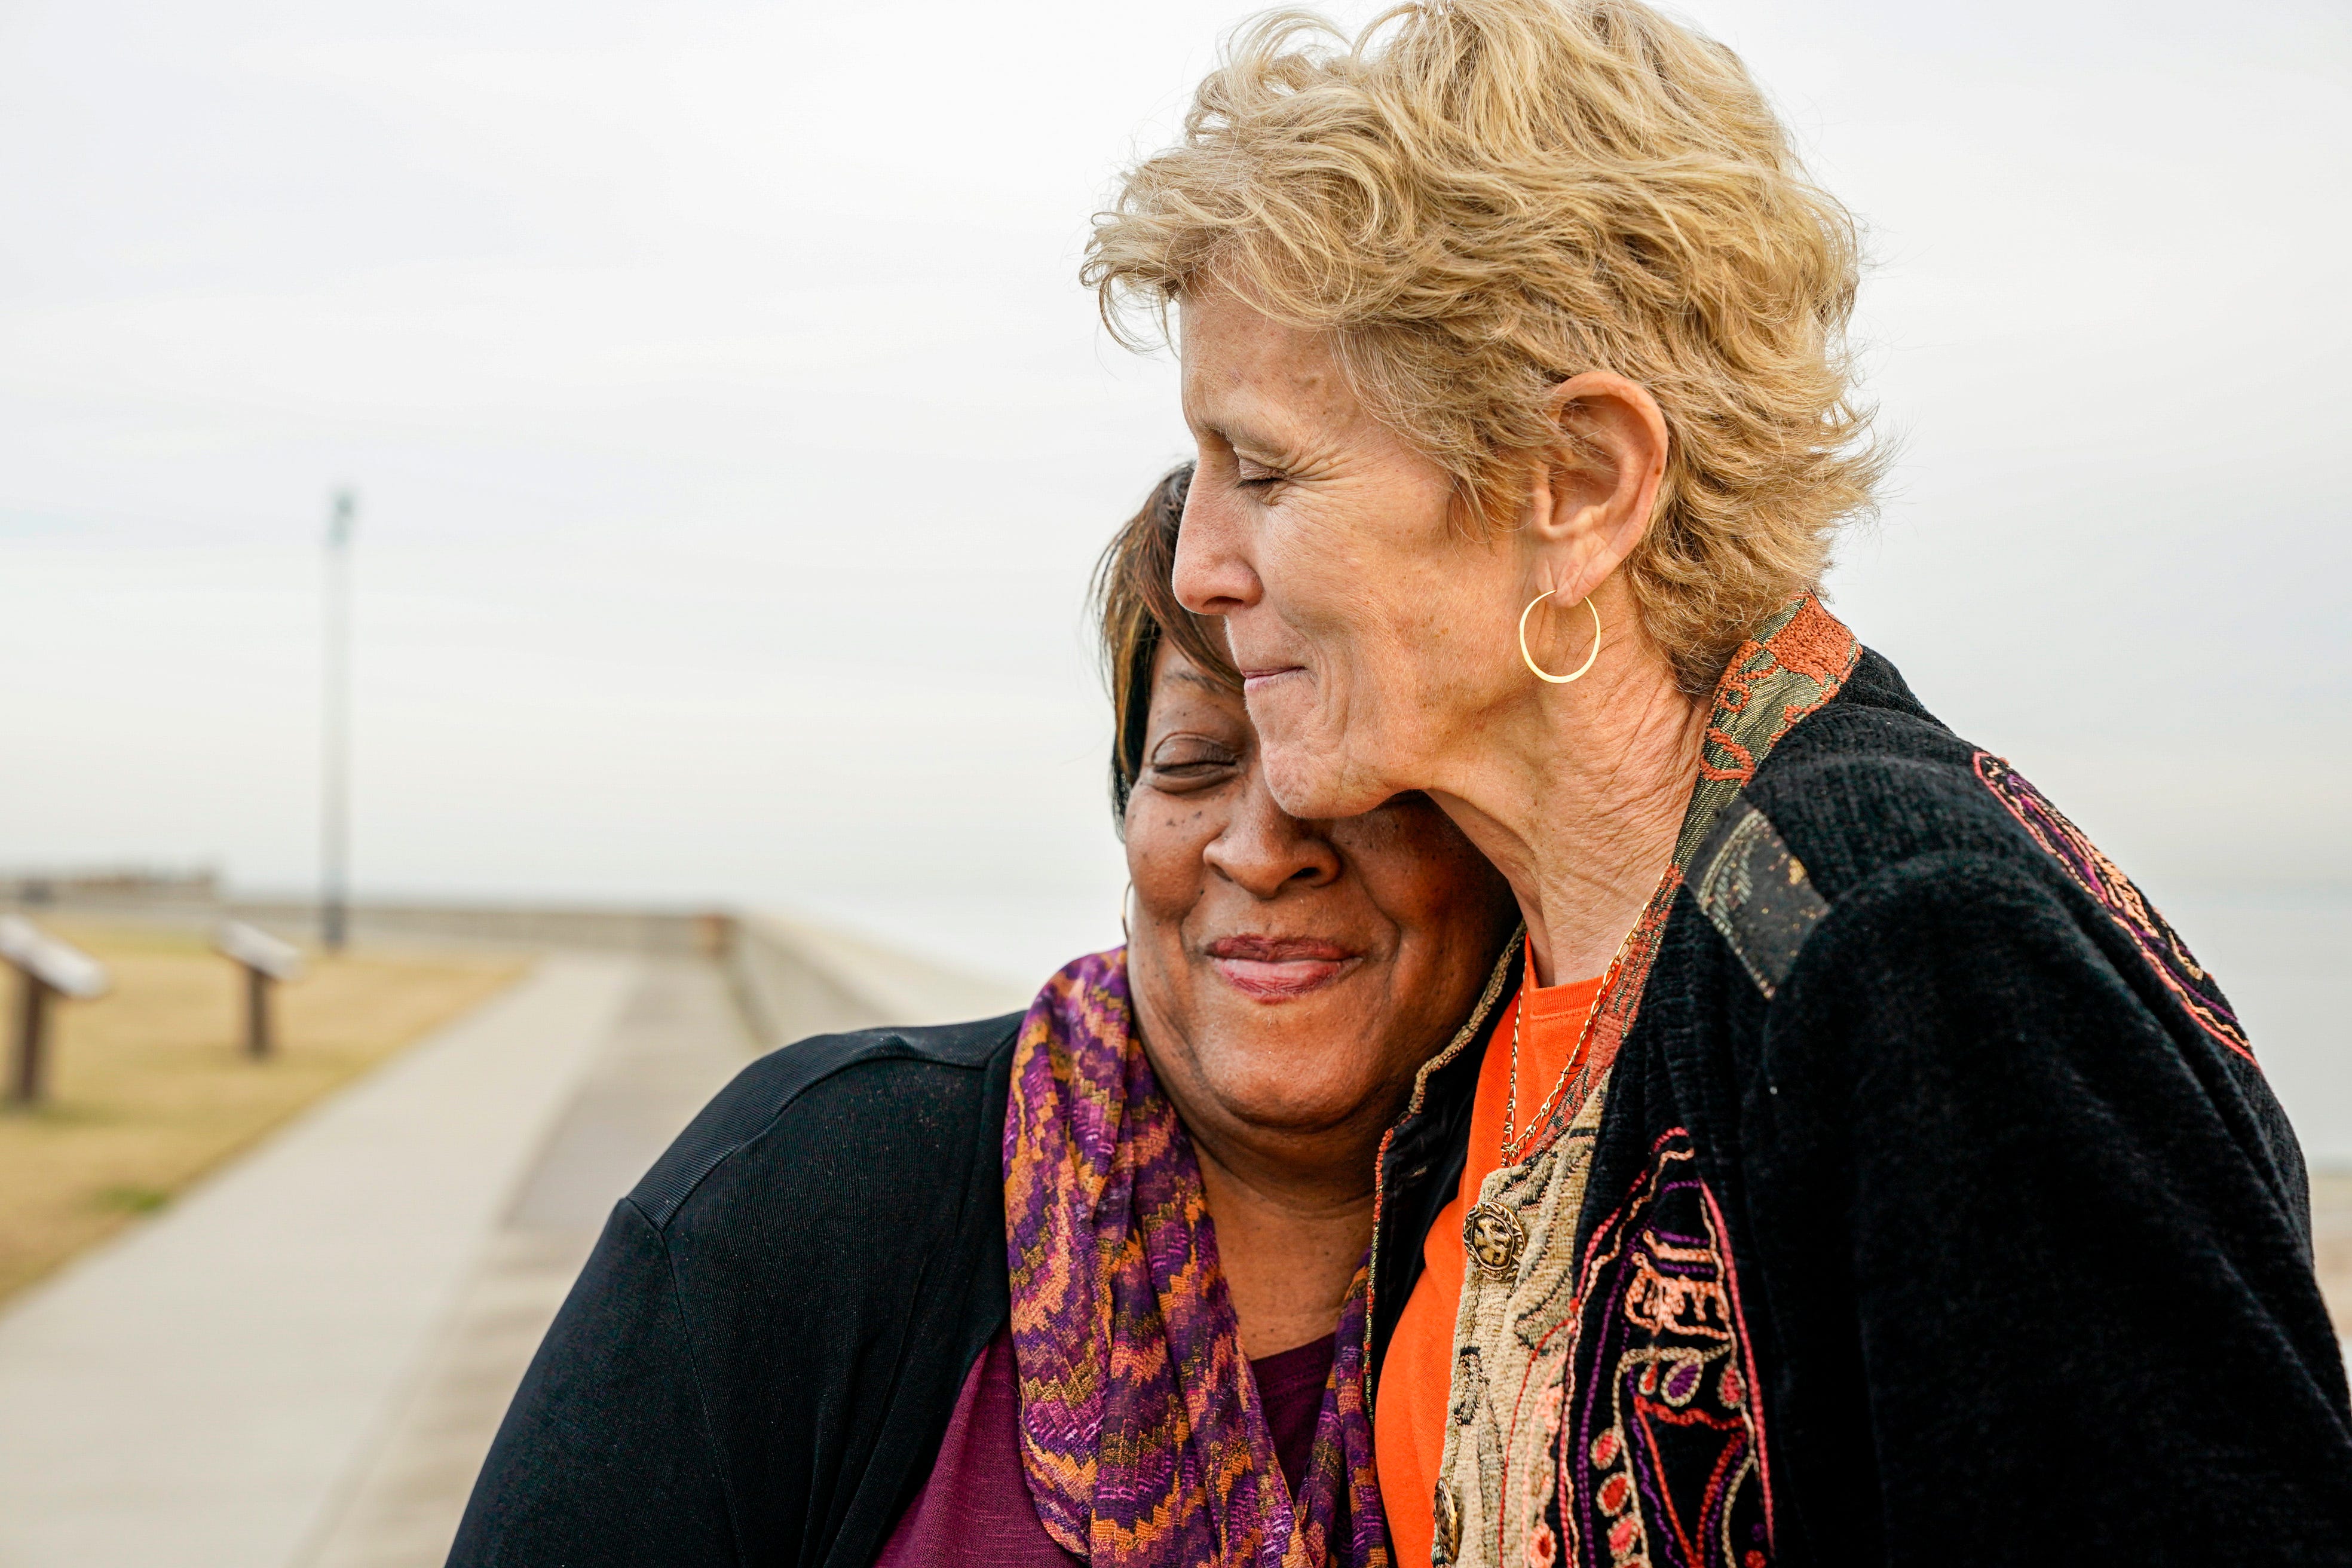 Wanda Tucker and Pam Tucker share a hug while visiting Point Comfort. Point Comfort is where the ship the White Lion arrived with "20 and odd" enslaved Africans in August 1619.